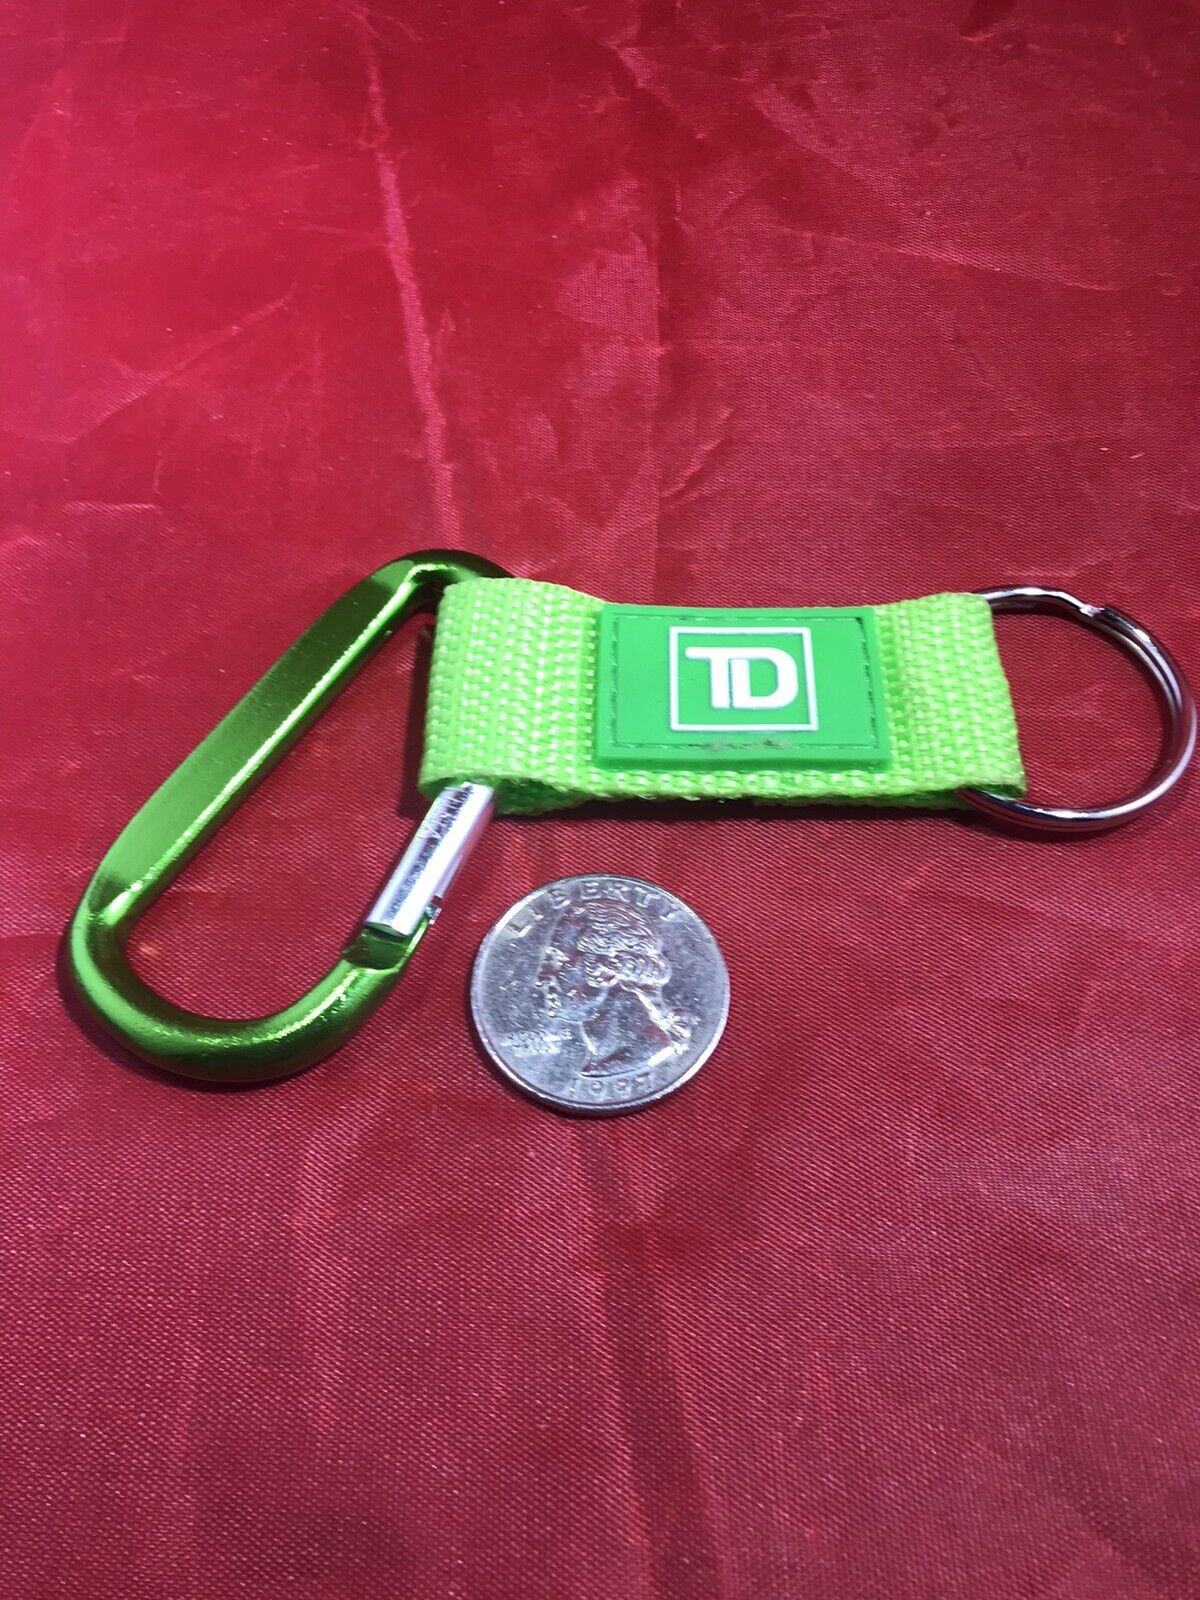 TD Bank Keychain Key Ring Clip Green Promotional